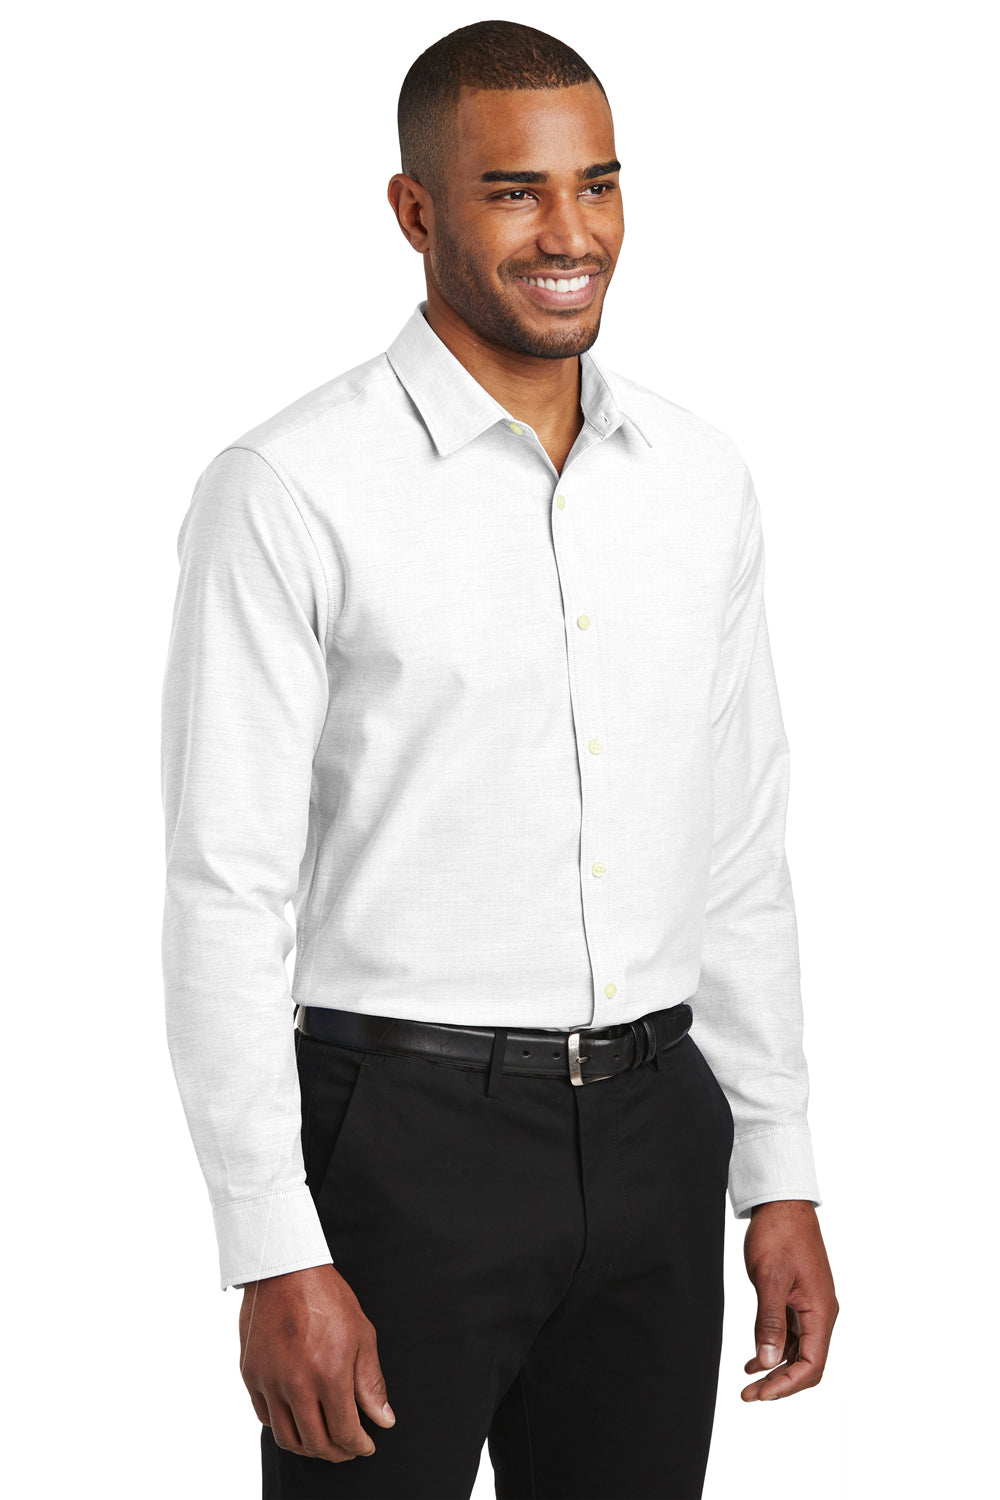 Port Authority S661 SuperPro Oxford Wrinkle Resistant Long Sleeve Button Down Shirt White 3Q